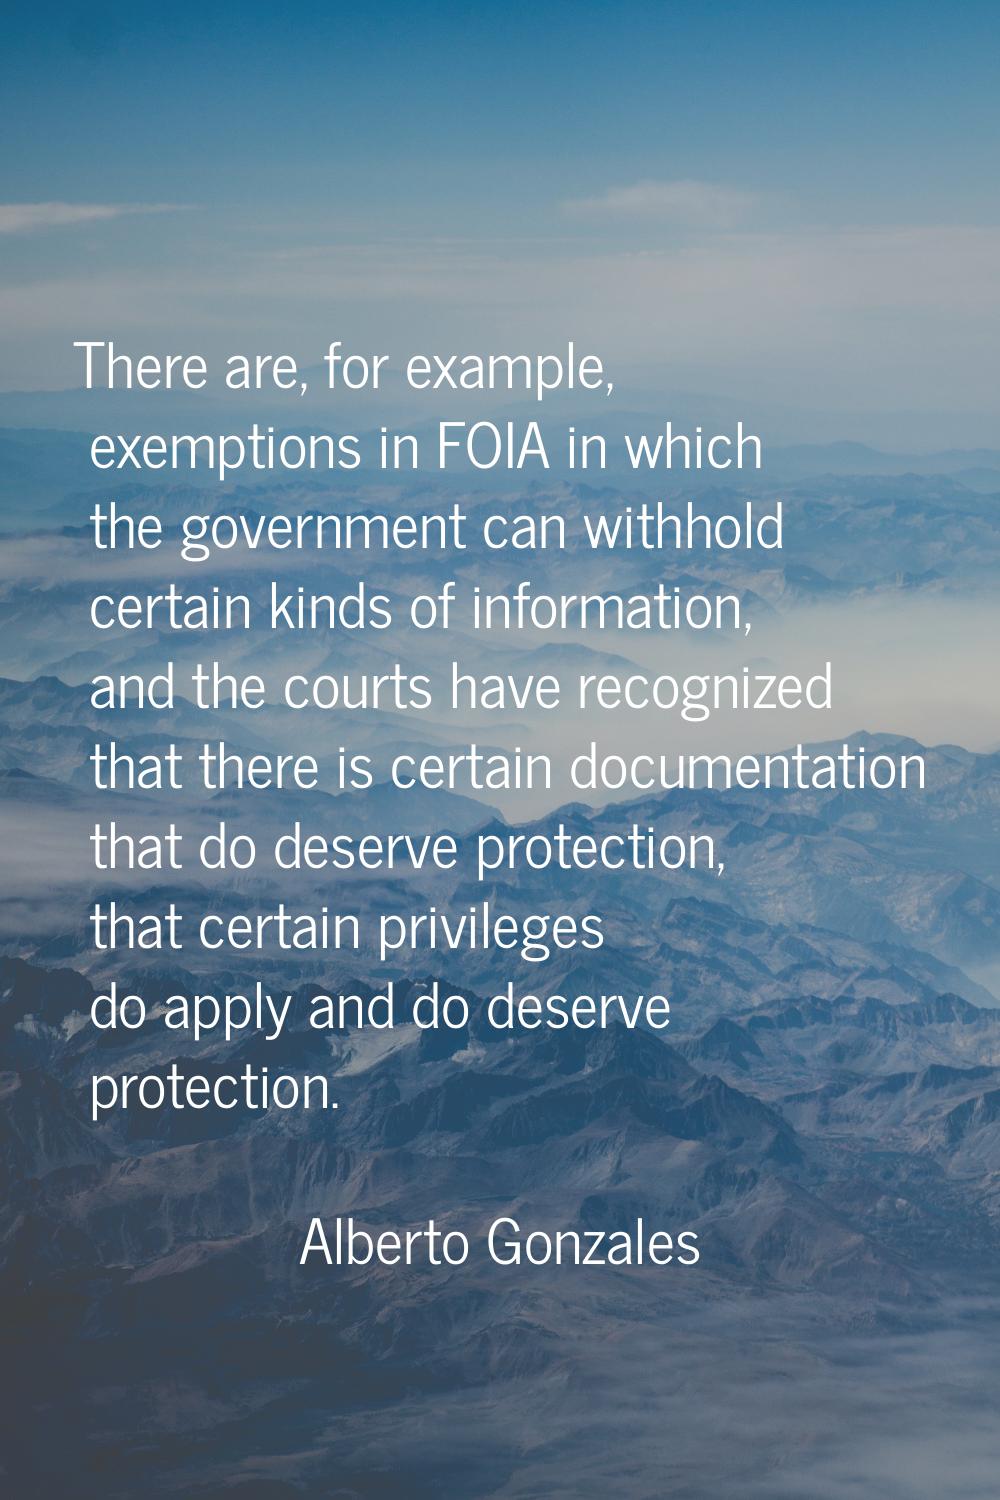 There are, for example, exemptions in FOIA in which the government can withhold certain kinds of in